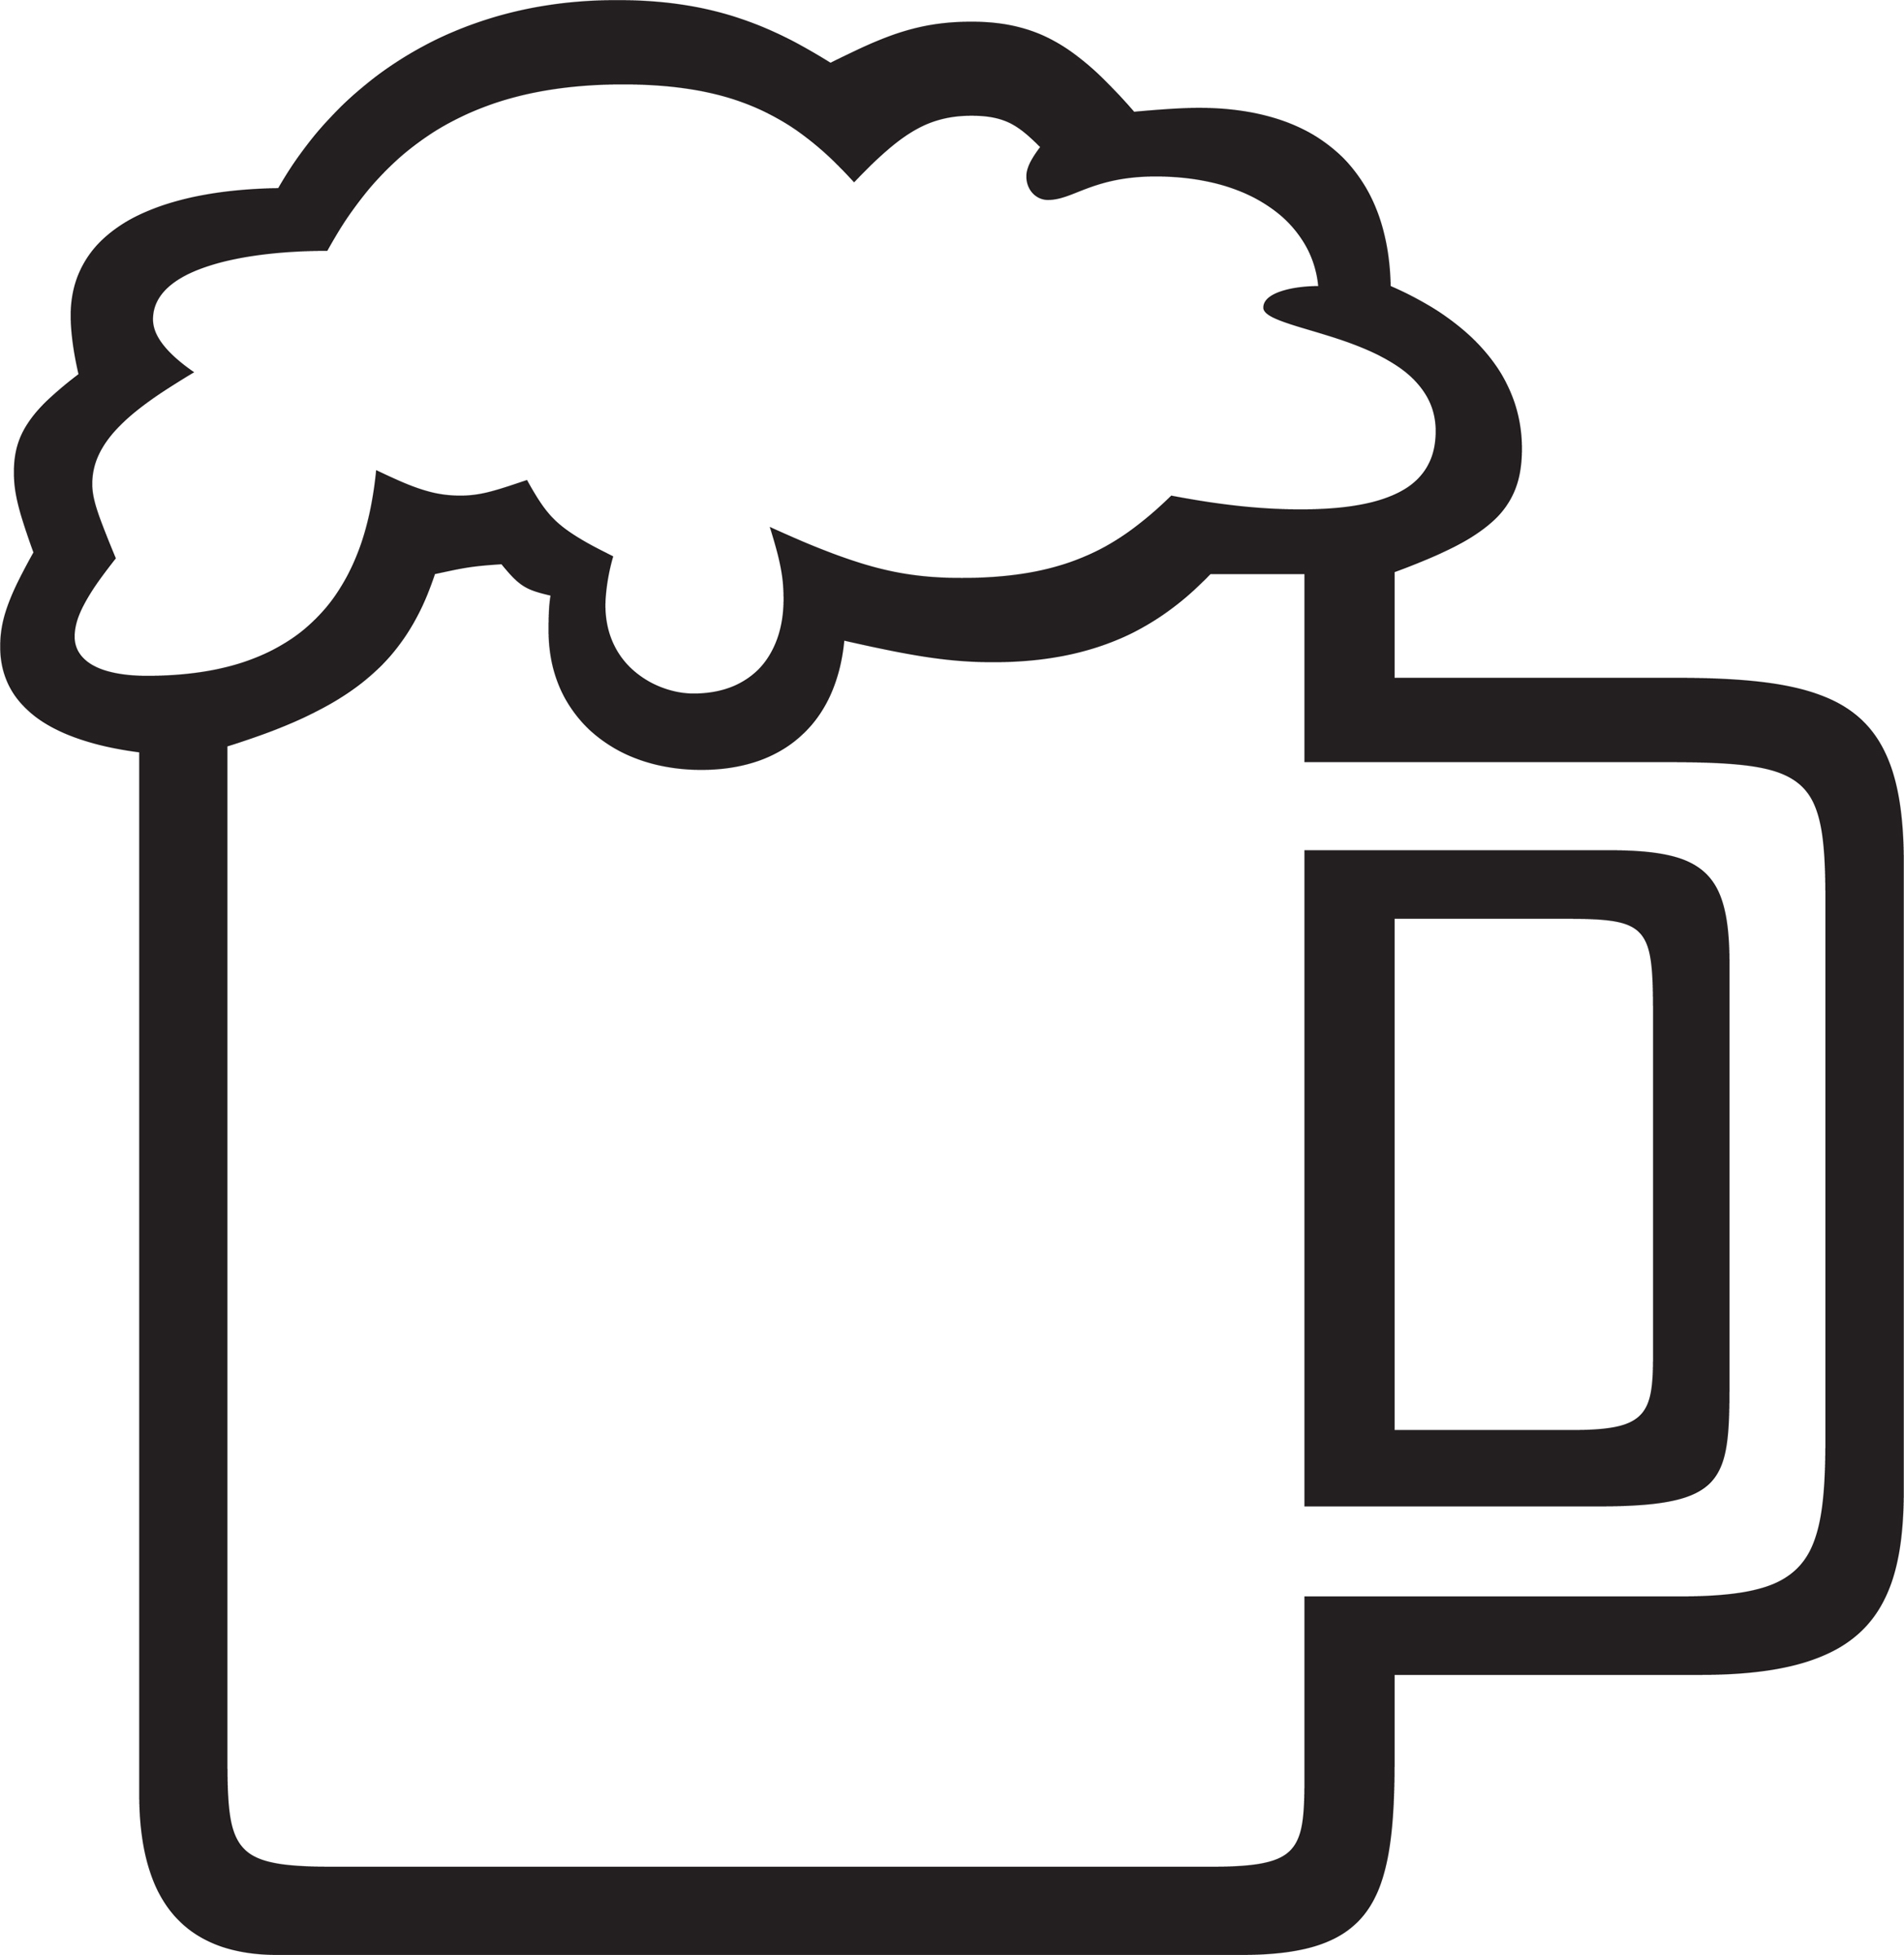 Free Beer Clip Art Black And White Download Free Clip Art Free Clip Art On Clipart Library